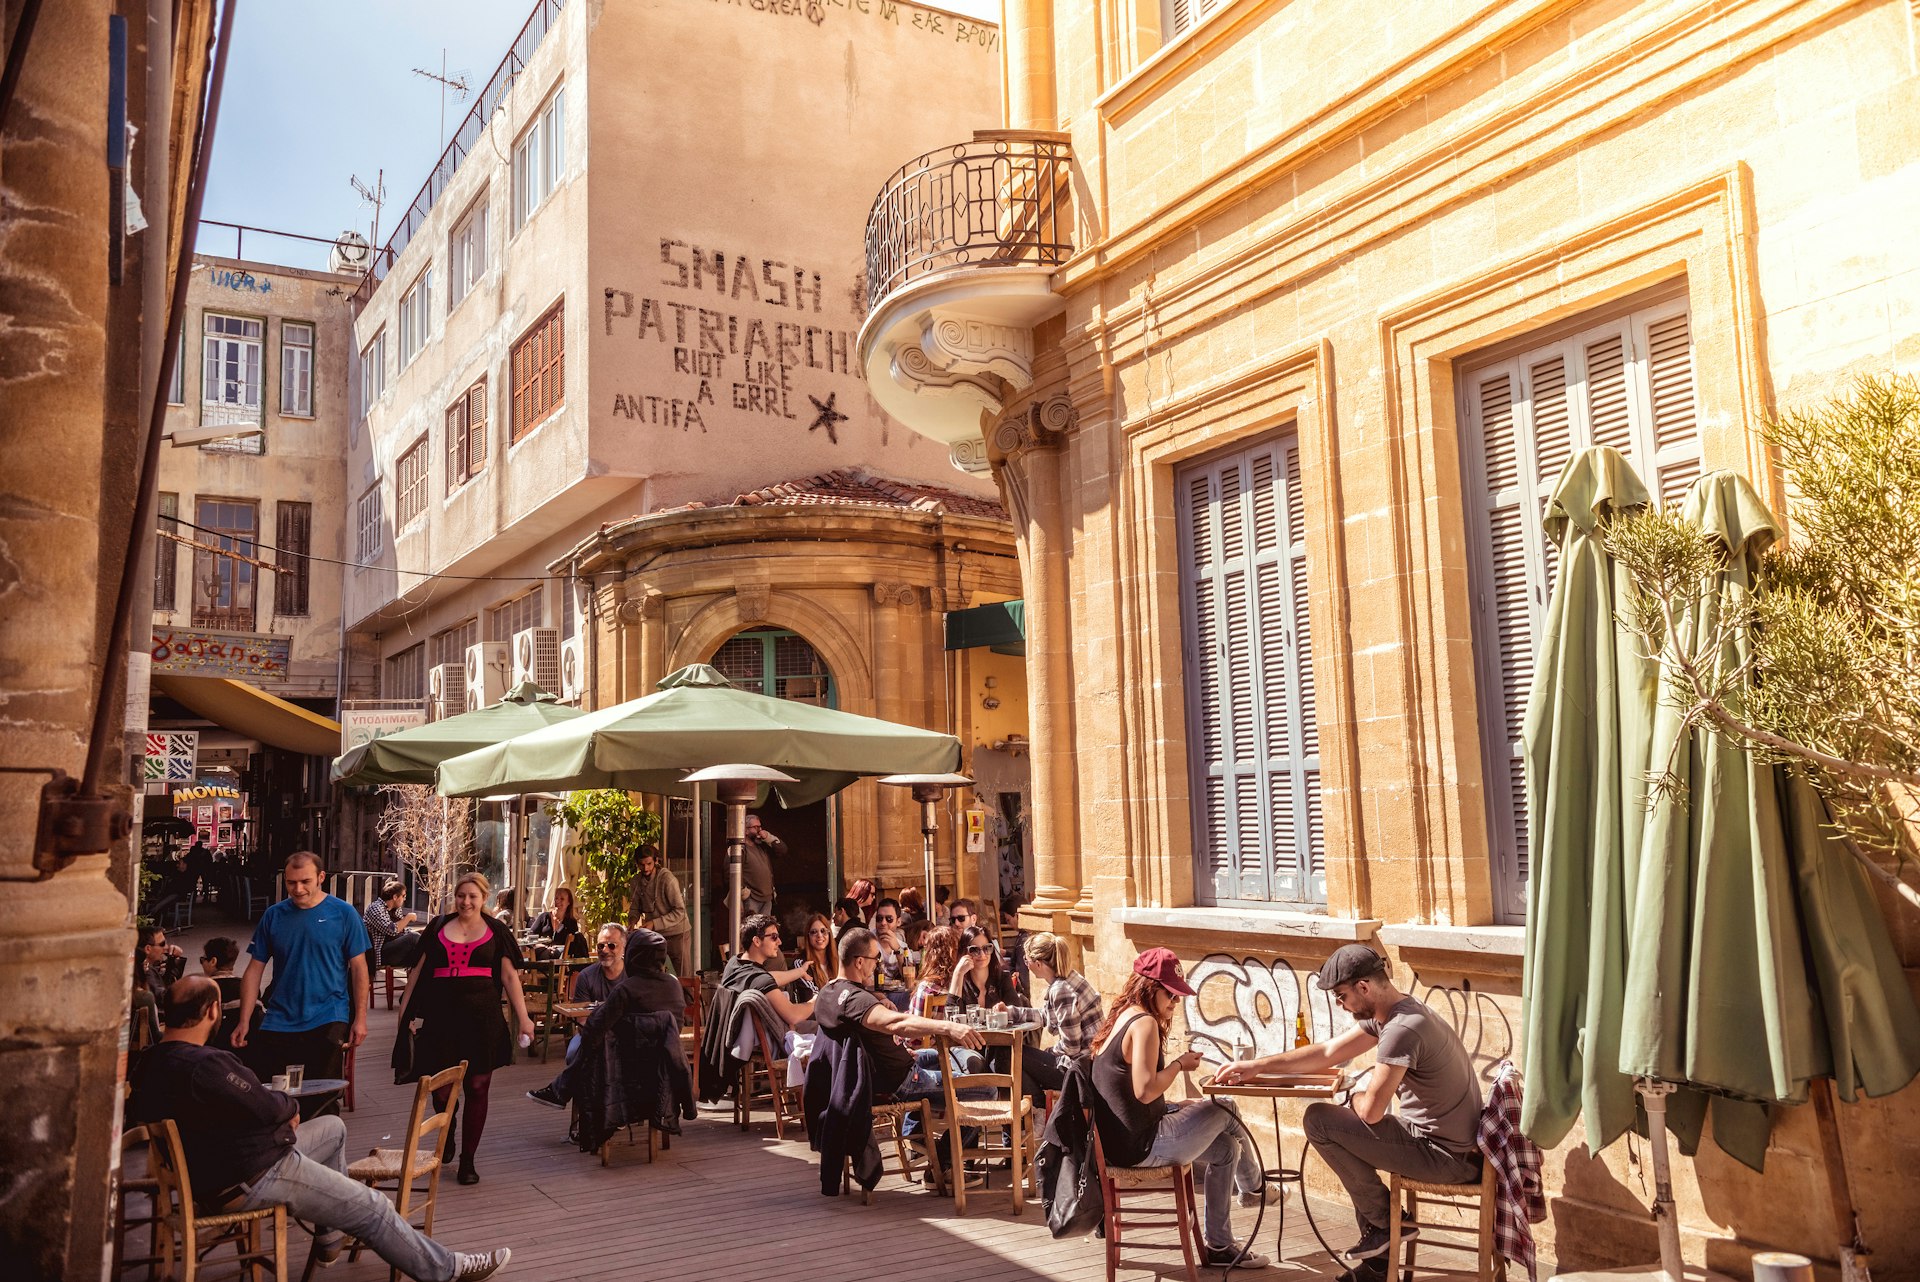 People in restaurants and coffee shops on Ledra street, lined with stone buildings, on a sunny day